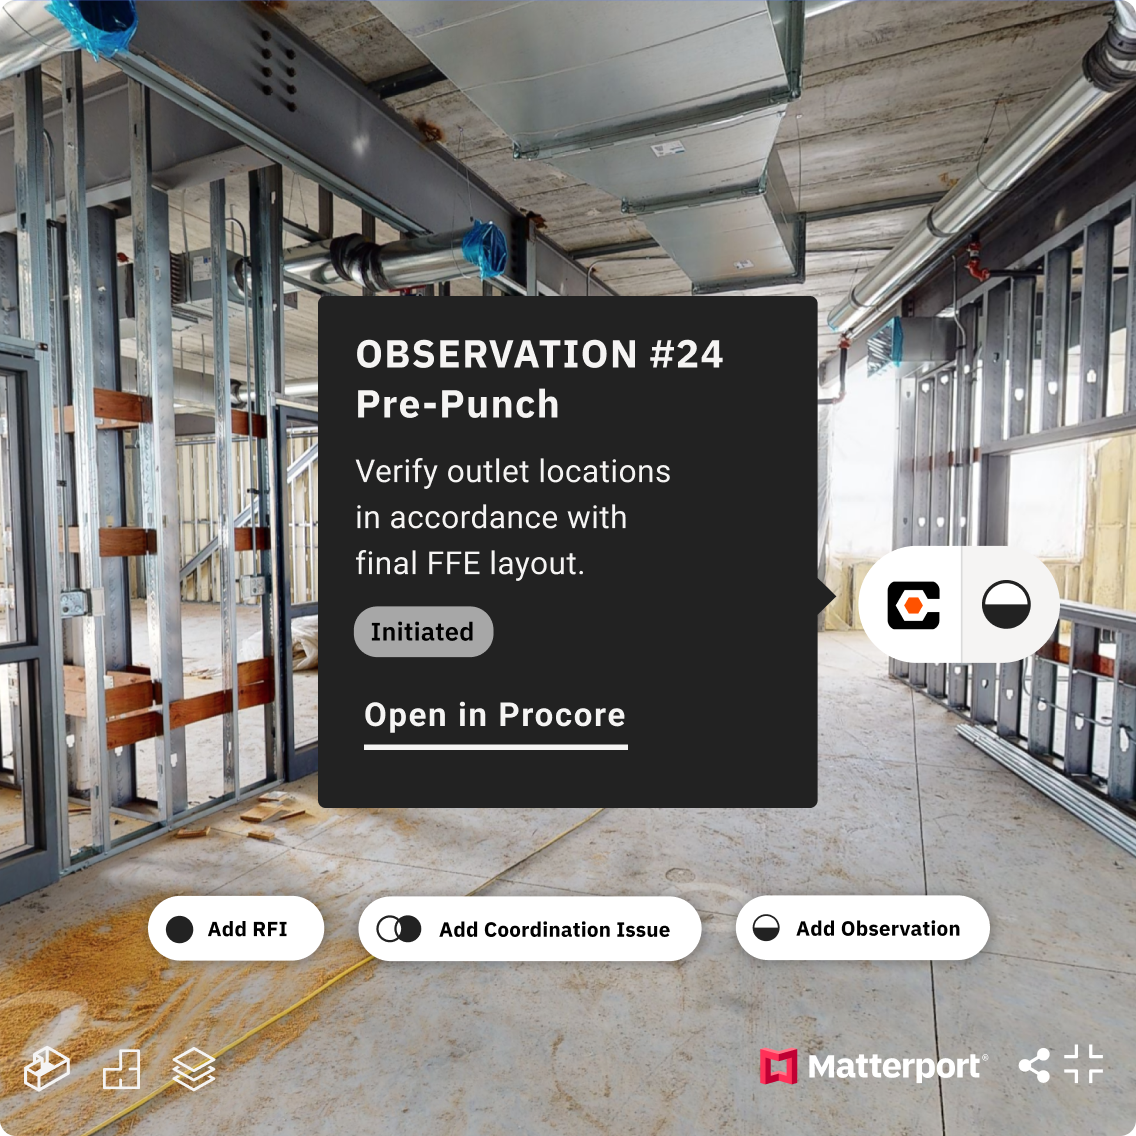 A Procore note in a Matterport model of a building under construction